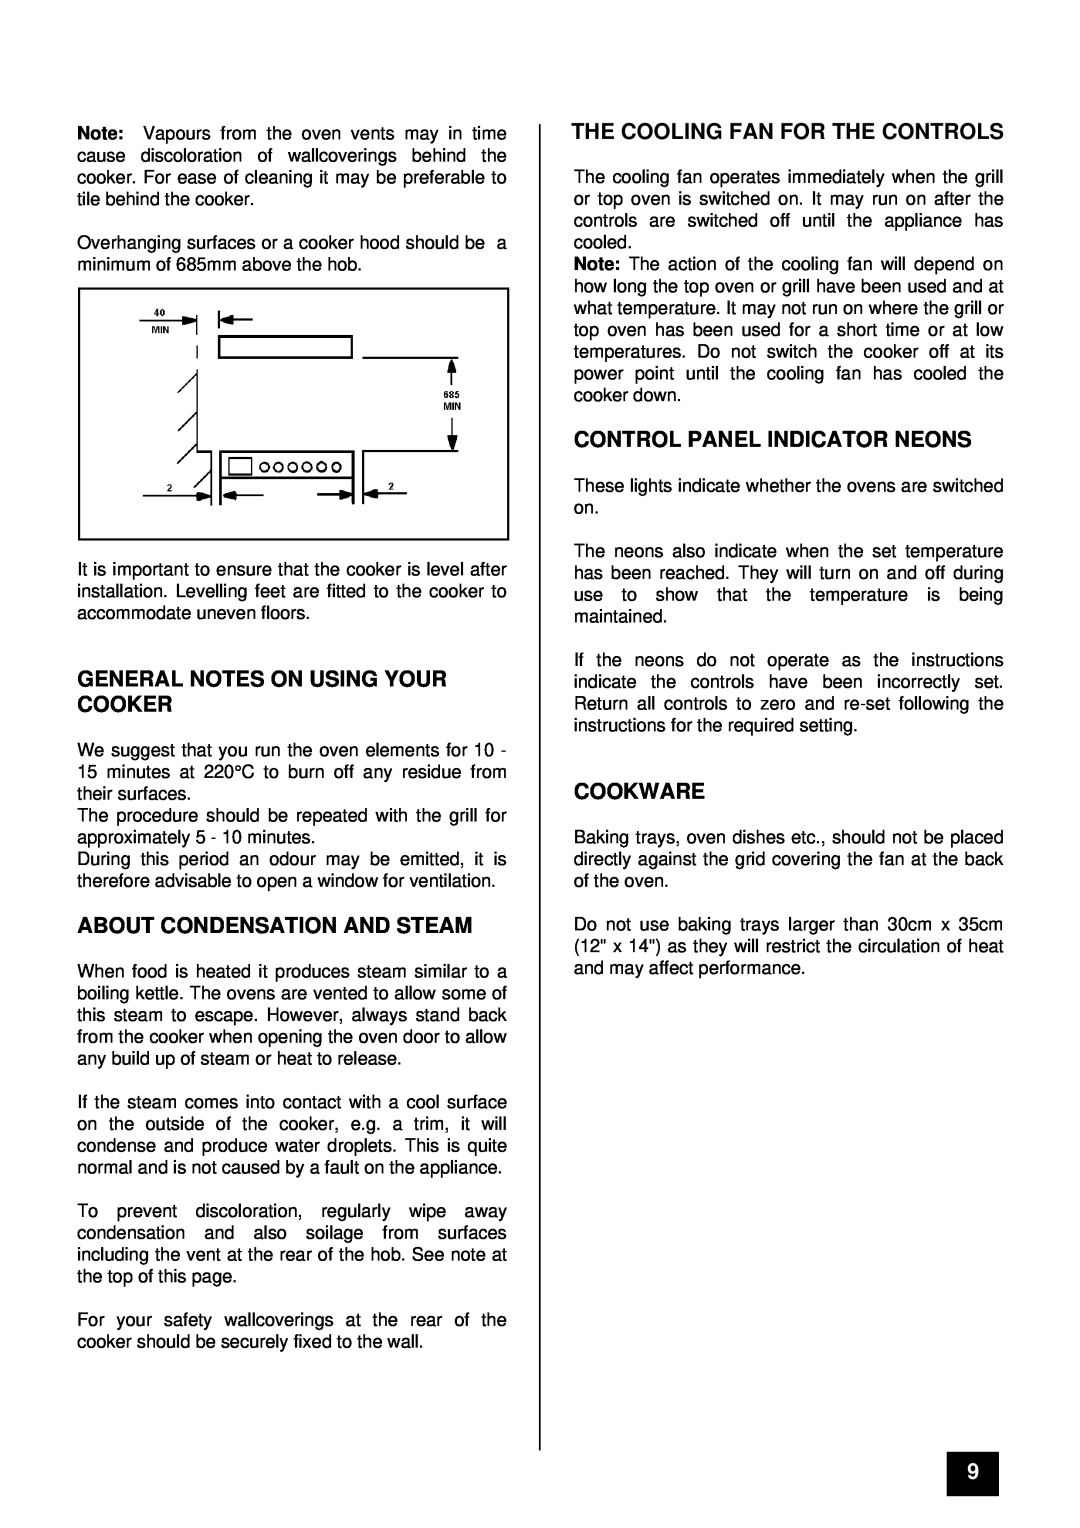 Tricity Bendix RE60GC General Notes On Using Your Cooker, About Condensation And Steam, The Cooling Fan For The Controls 